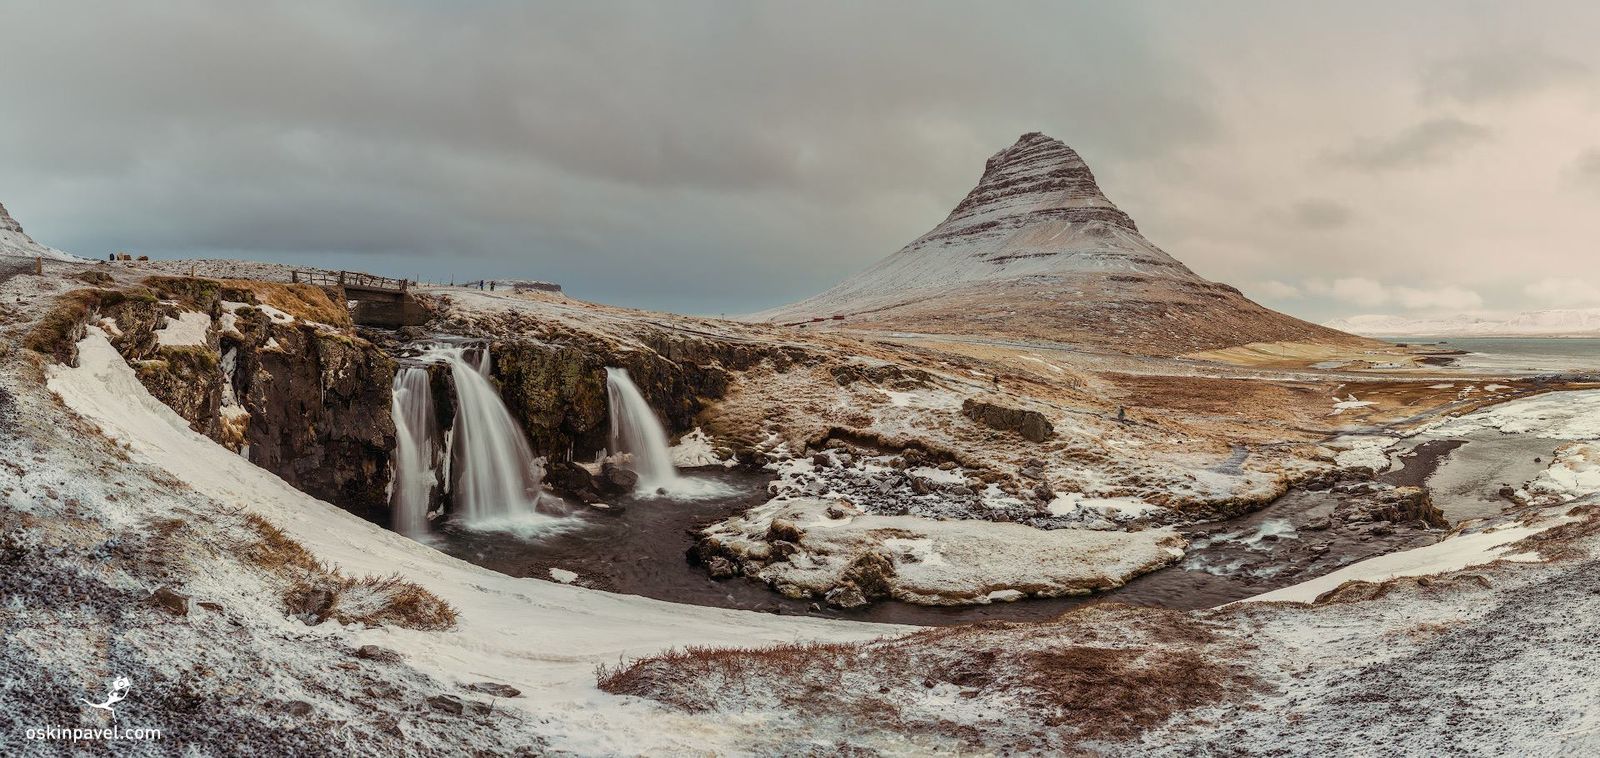 © Pavel Oskin - Image from the The World of Iceland photography project